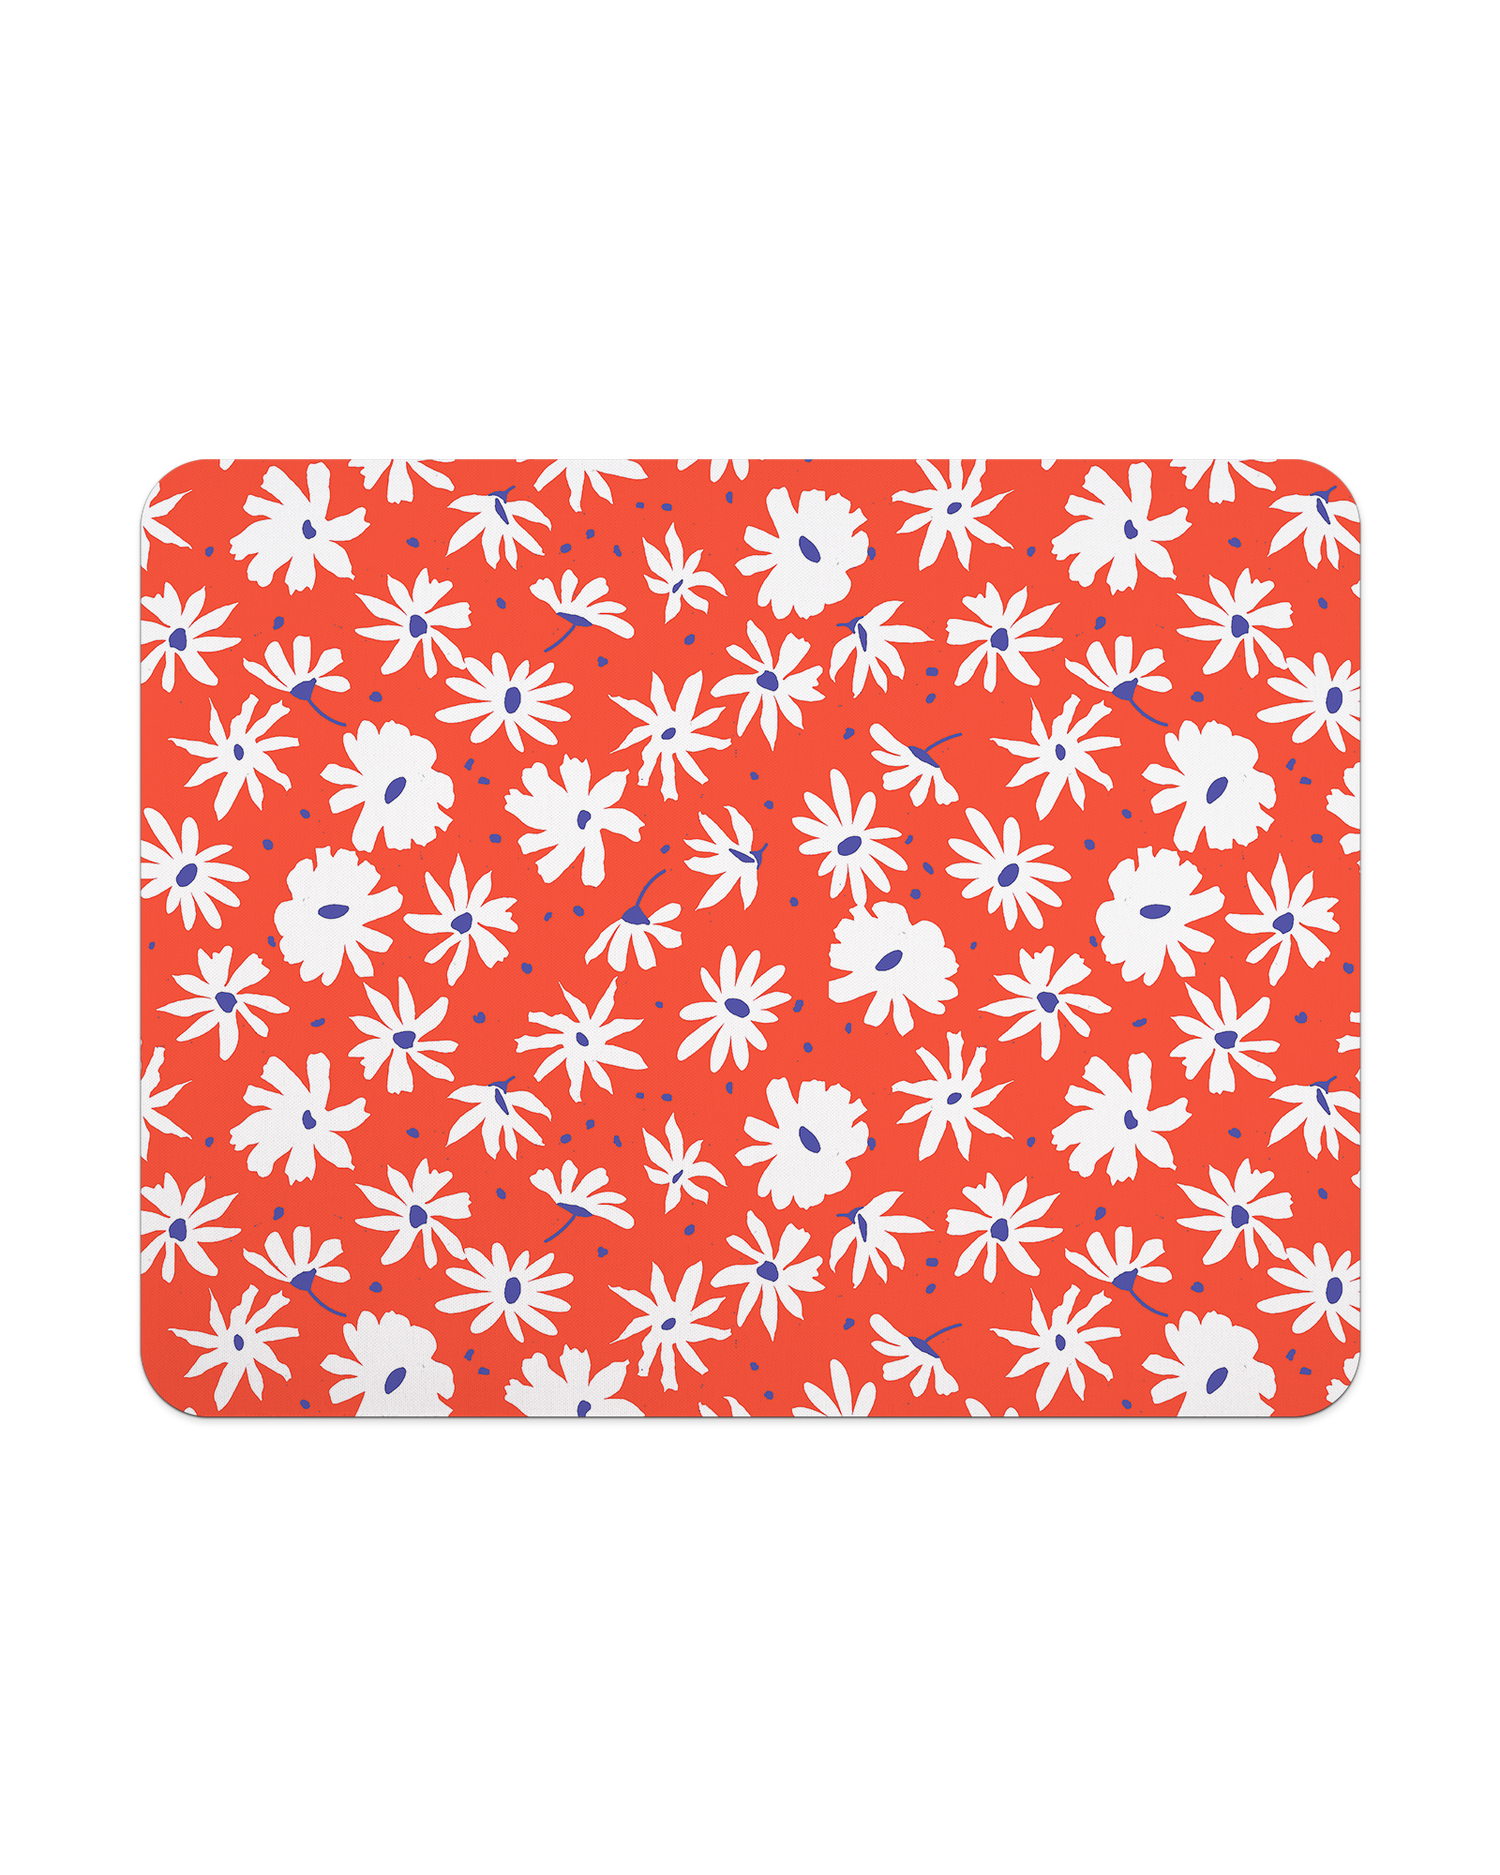 Retro Daisy Mouse Pad from Top